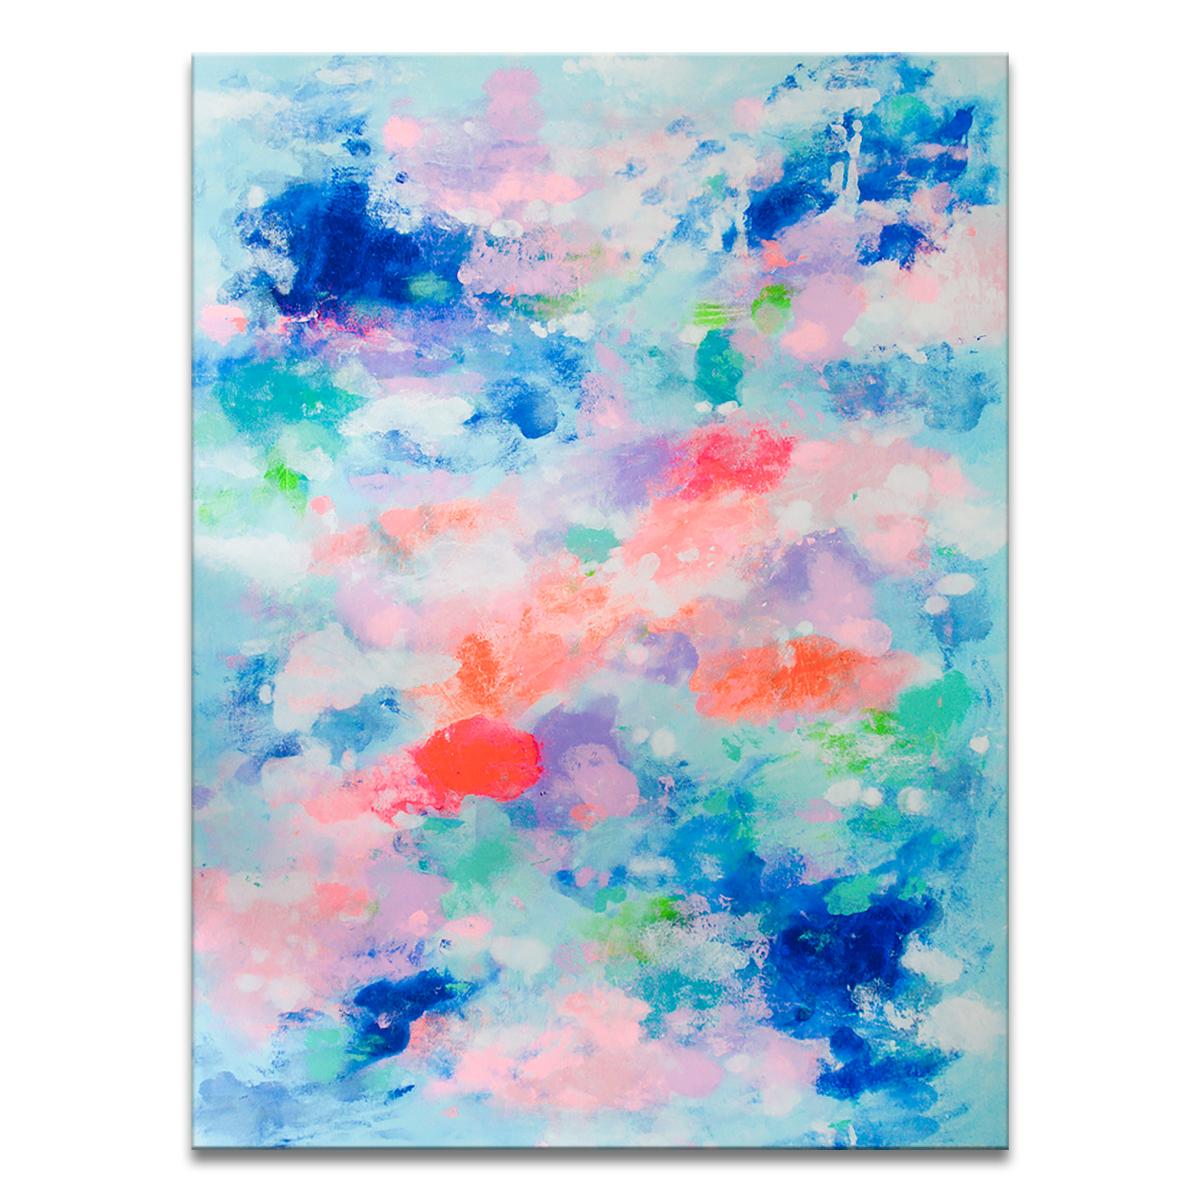 'Waking Up In The Sky' Wrapped Canvas Original Painting features a whimsical abstract aesthetic in vivid hues of blue, pink, green, orange, and purple. Inspired by her travels and belief of speaking through color, Samerra’s abstract work is a